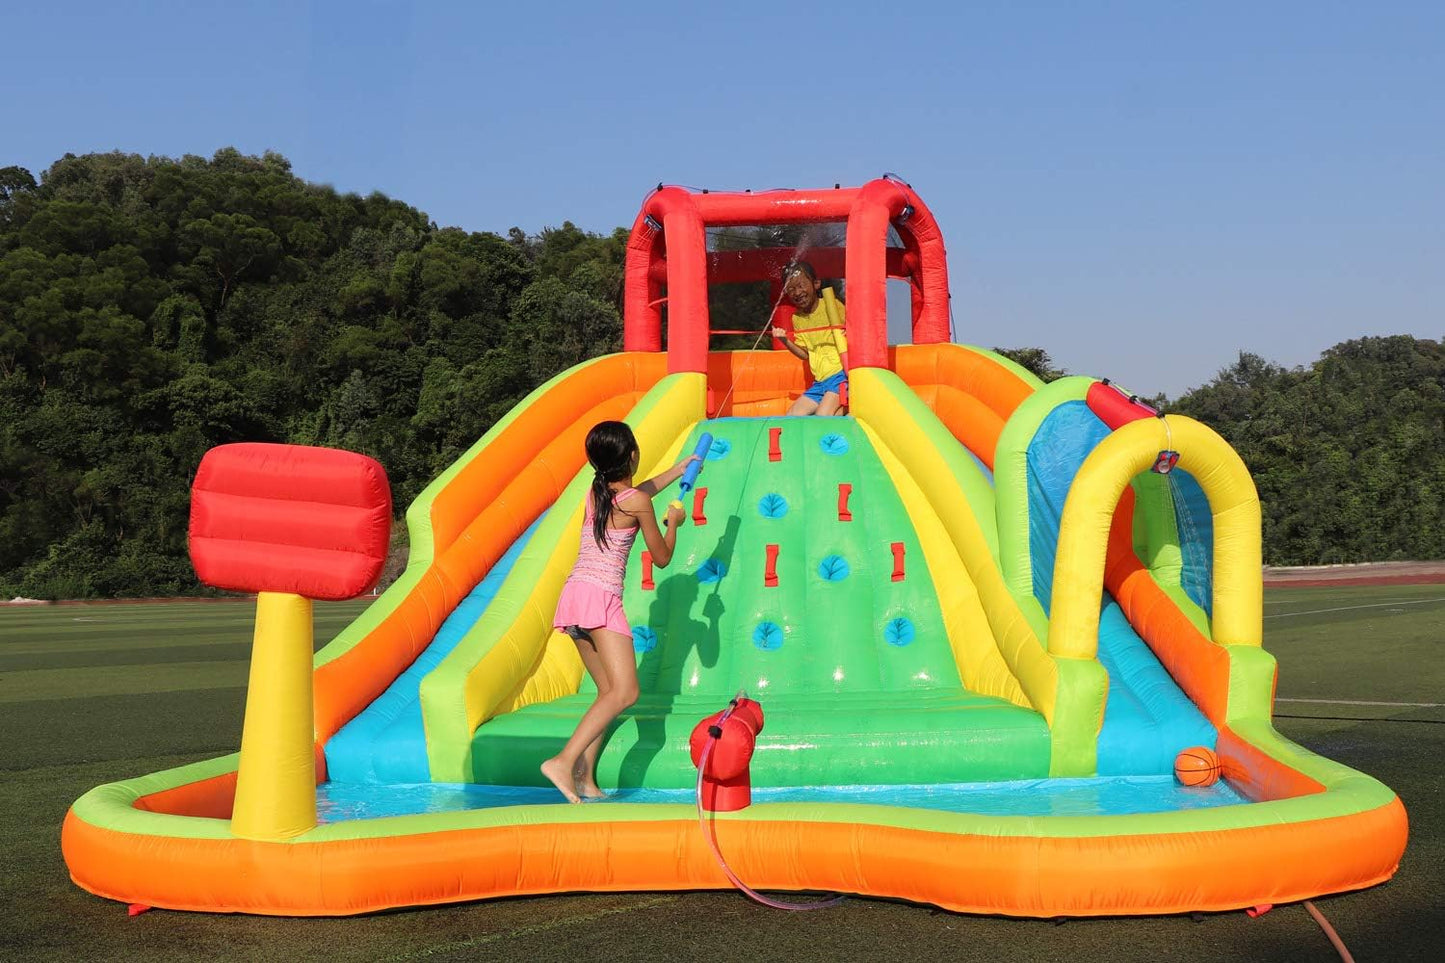 Inflatable Water Slide Adventure Park Game Center with Arched Gun Spray, Air Blower